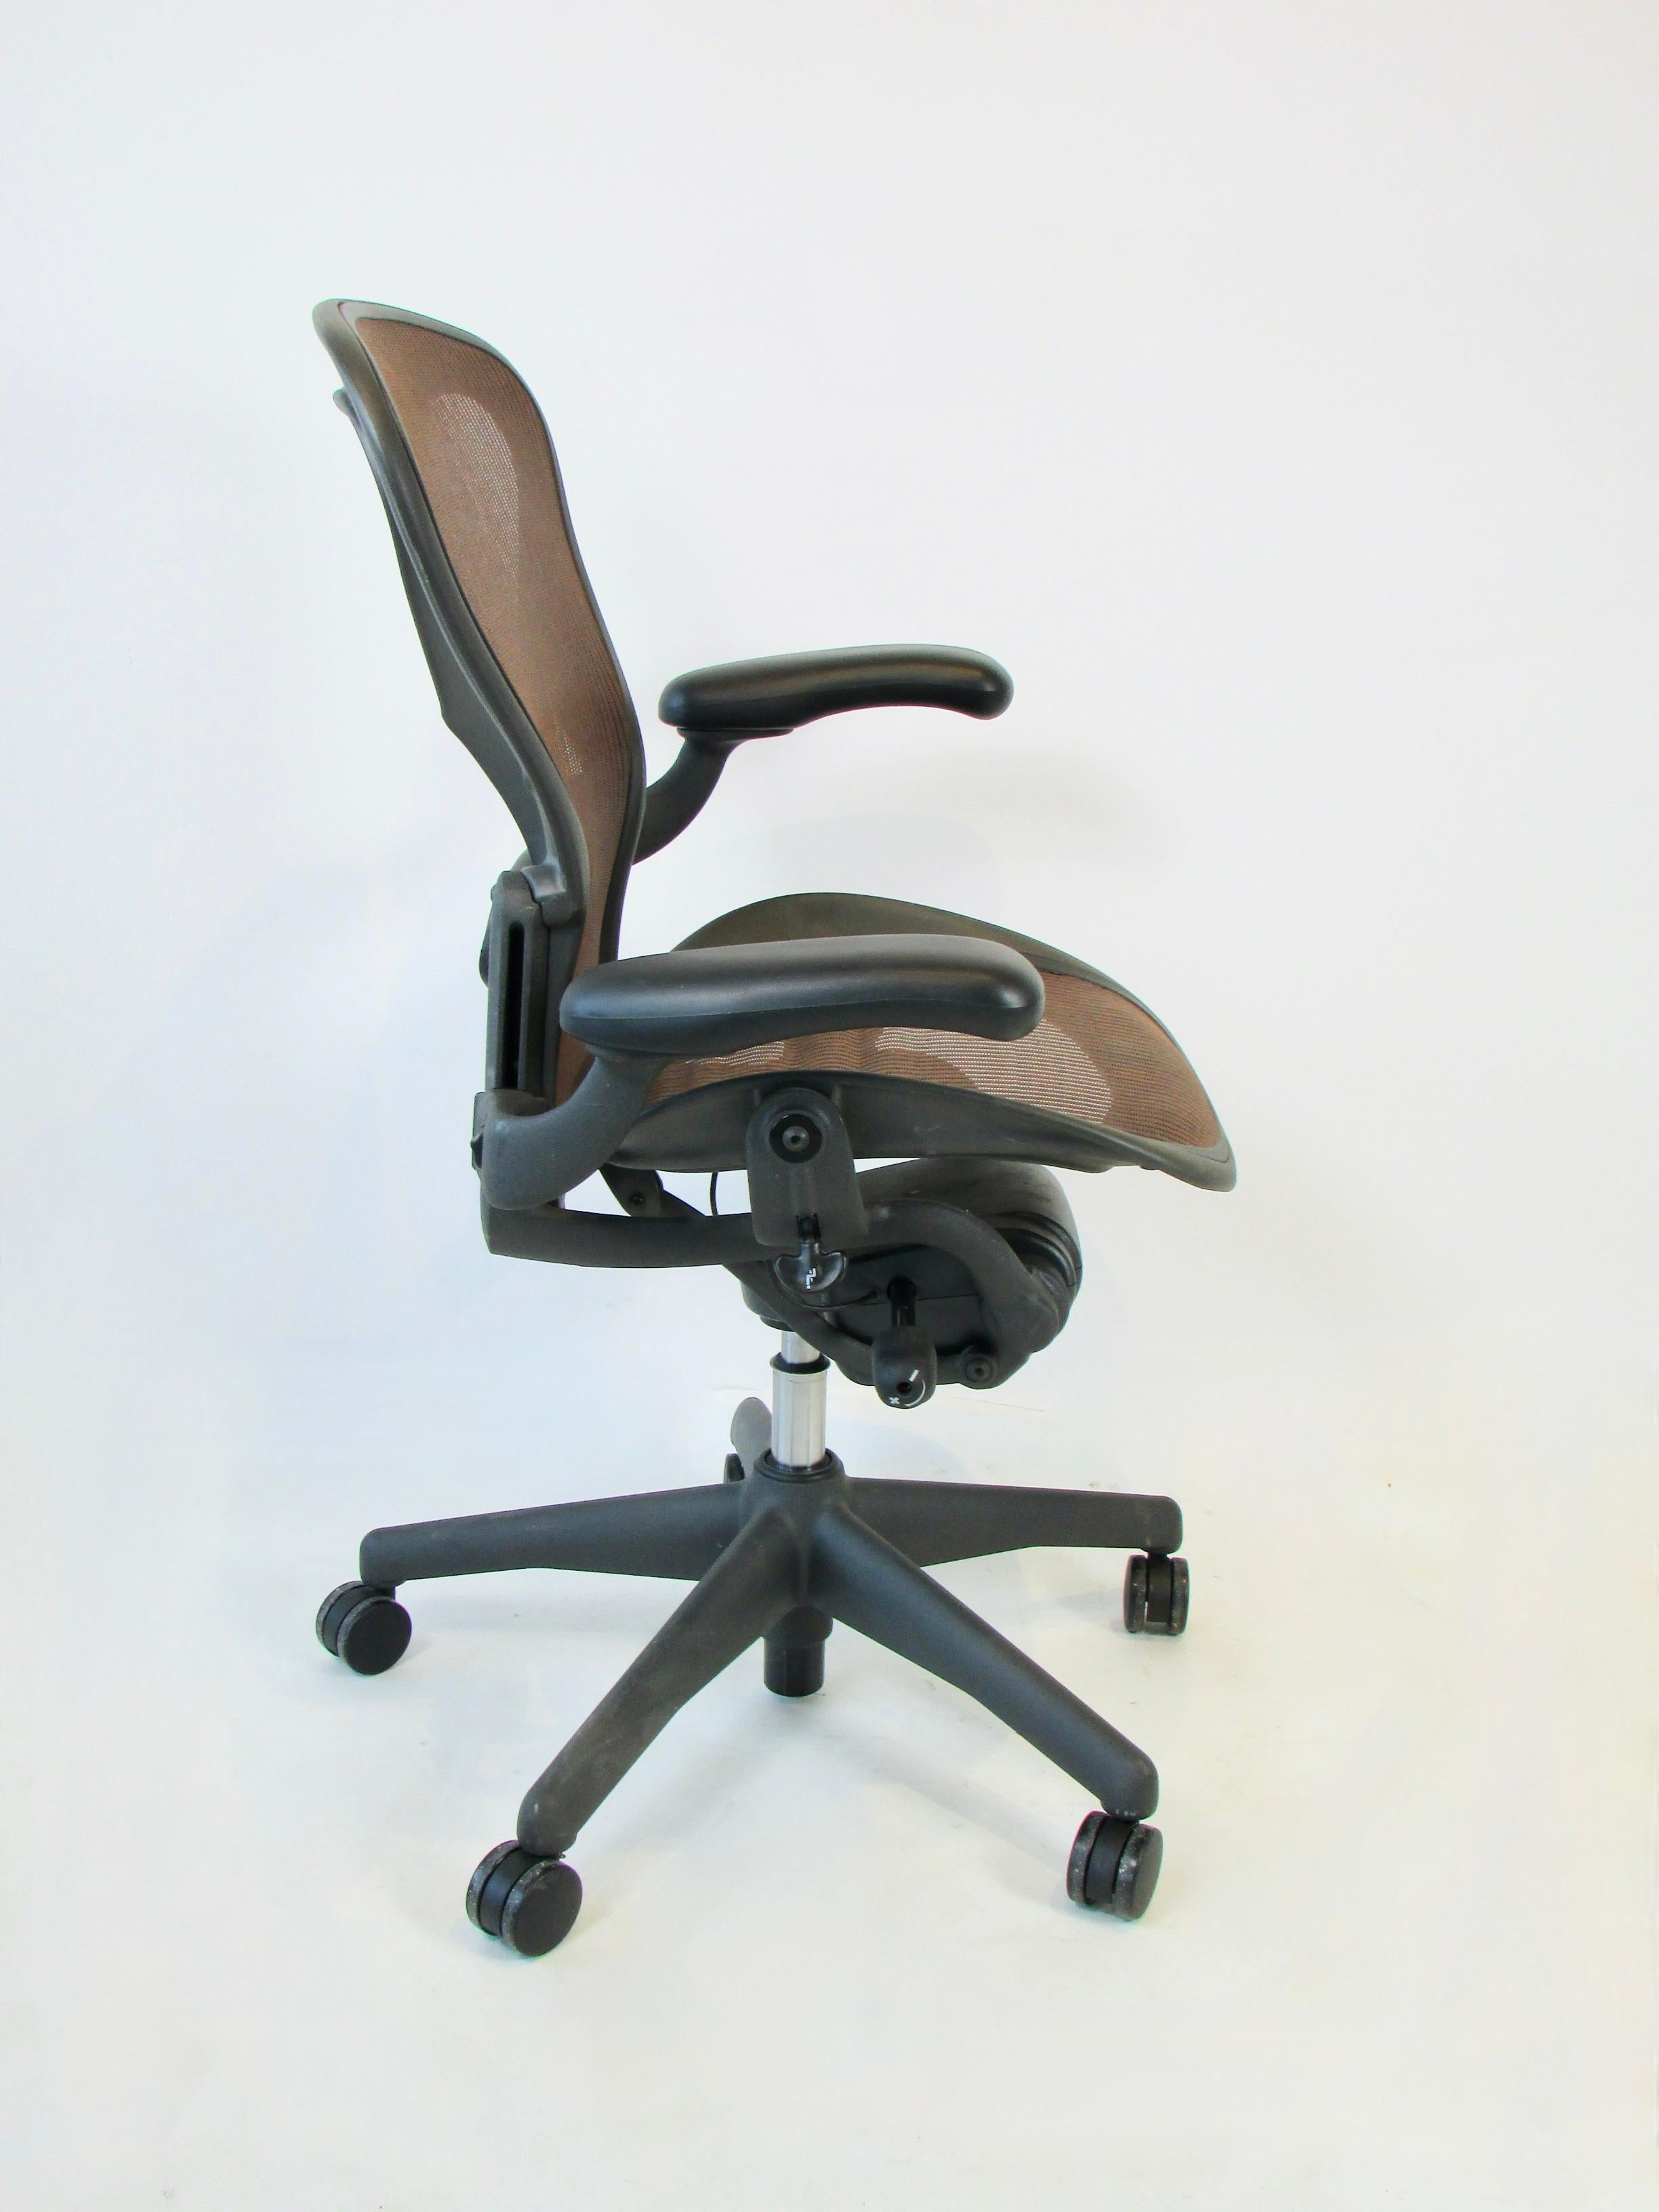 classic office chair design